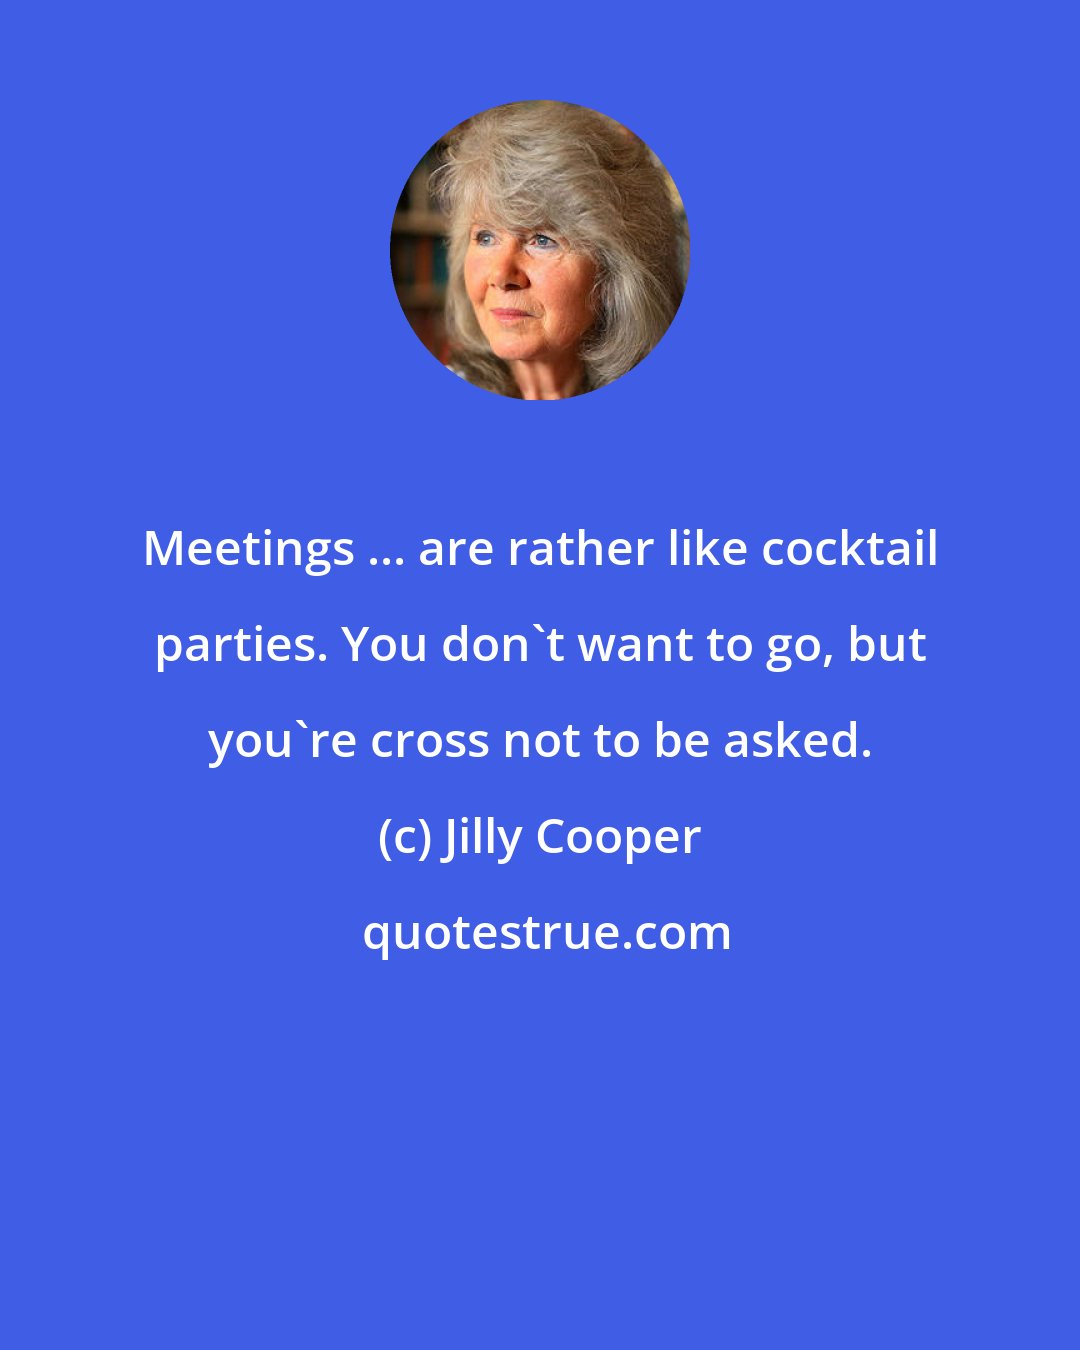 Jilly Cooper: Meetings ... are rather like cocktail parties. You don't want to go, but you're cross not to be asked.